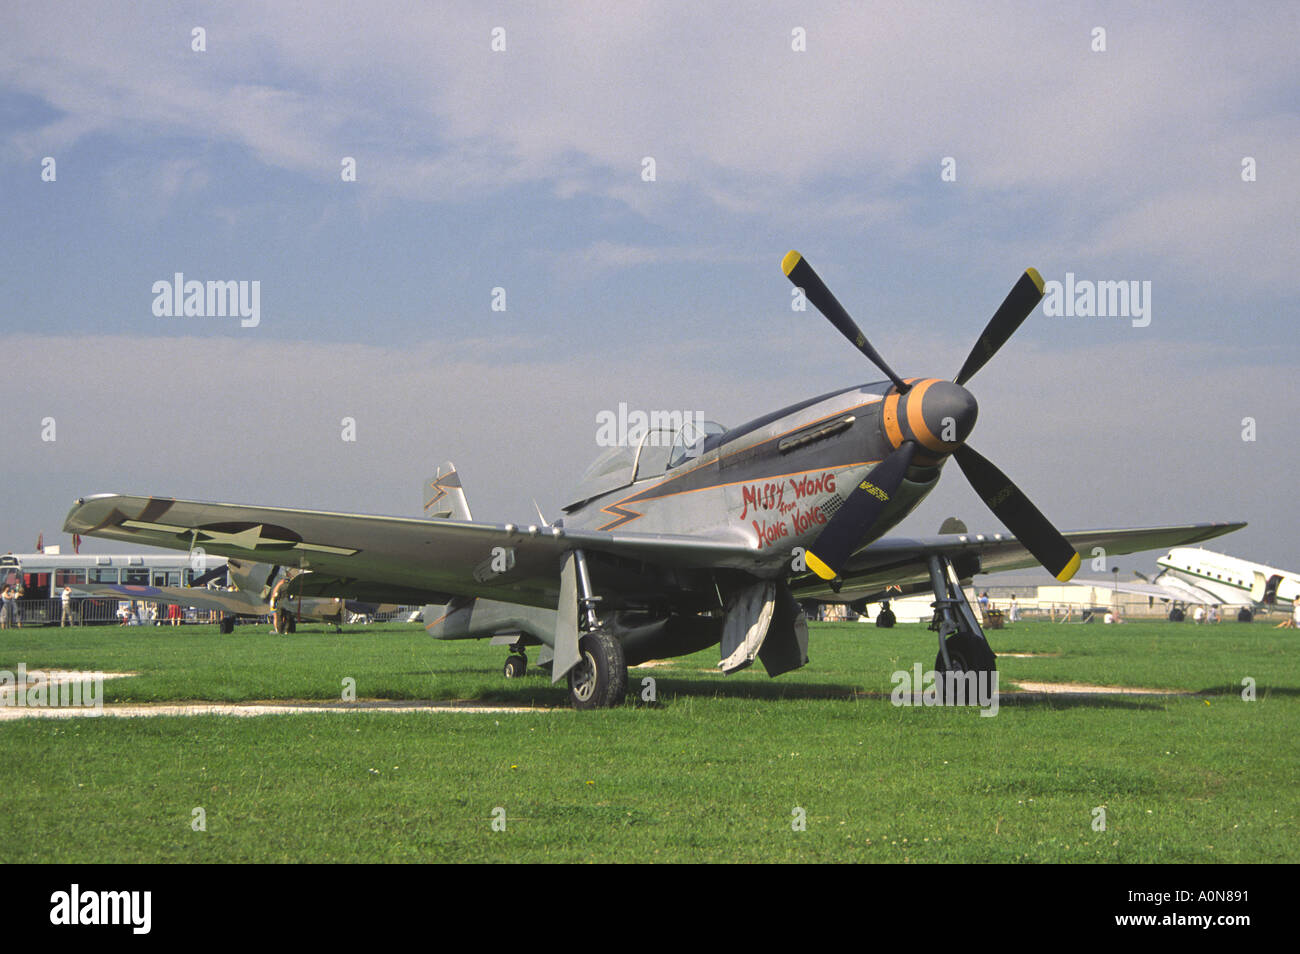 North American P51D Mustang Kämpfer USAAF Coventry Flughafen Airshow Stockfoto